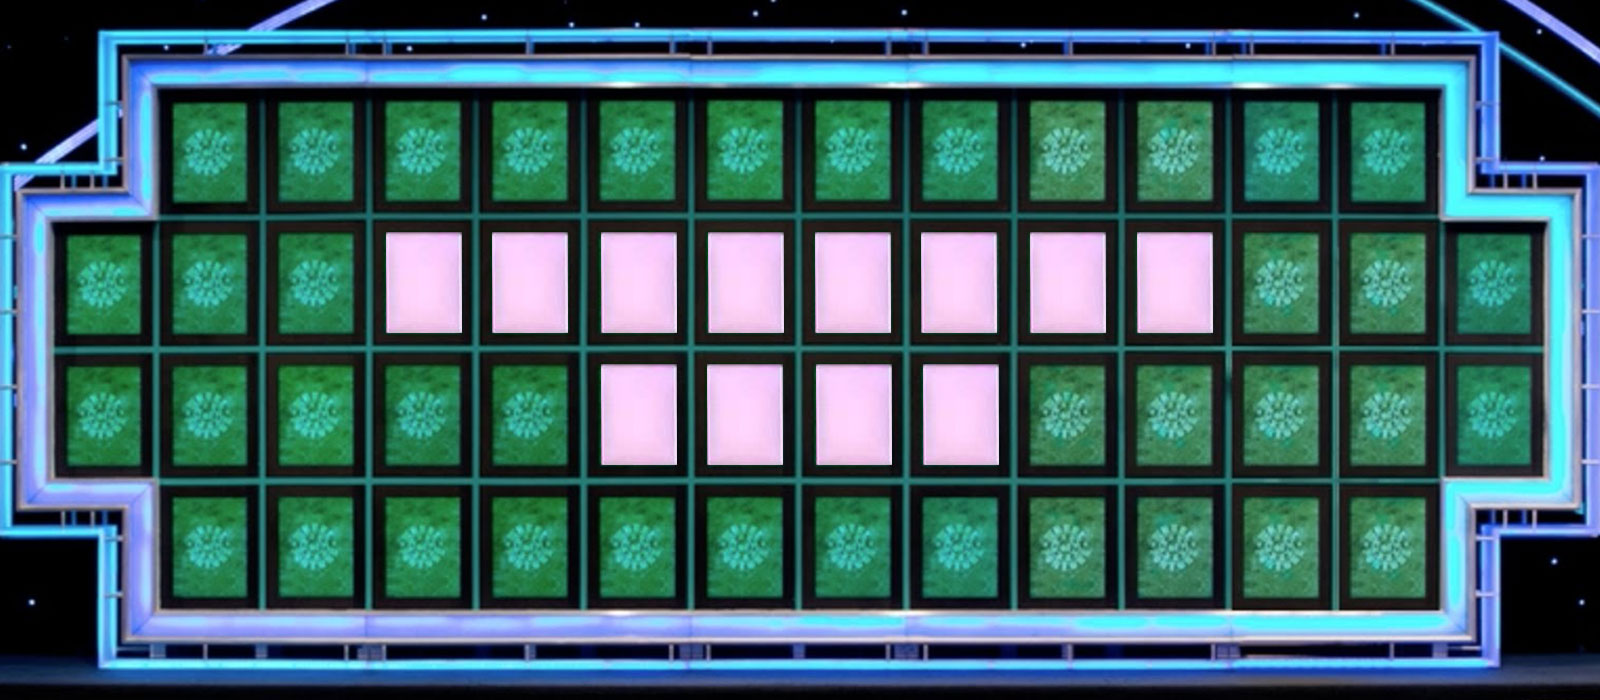 Can You Solve These Wheel of Fortune Puzzles? 163